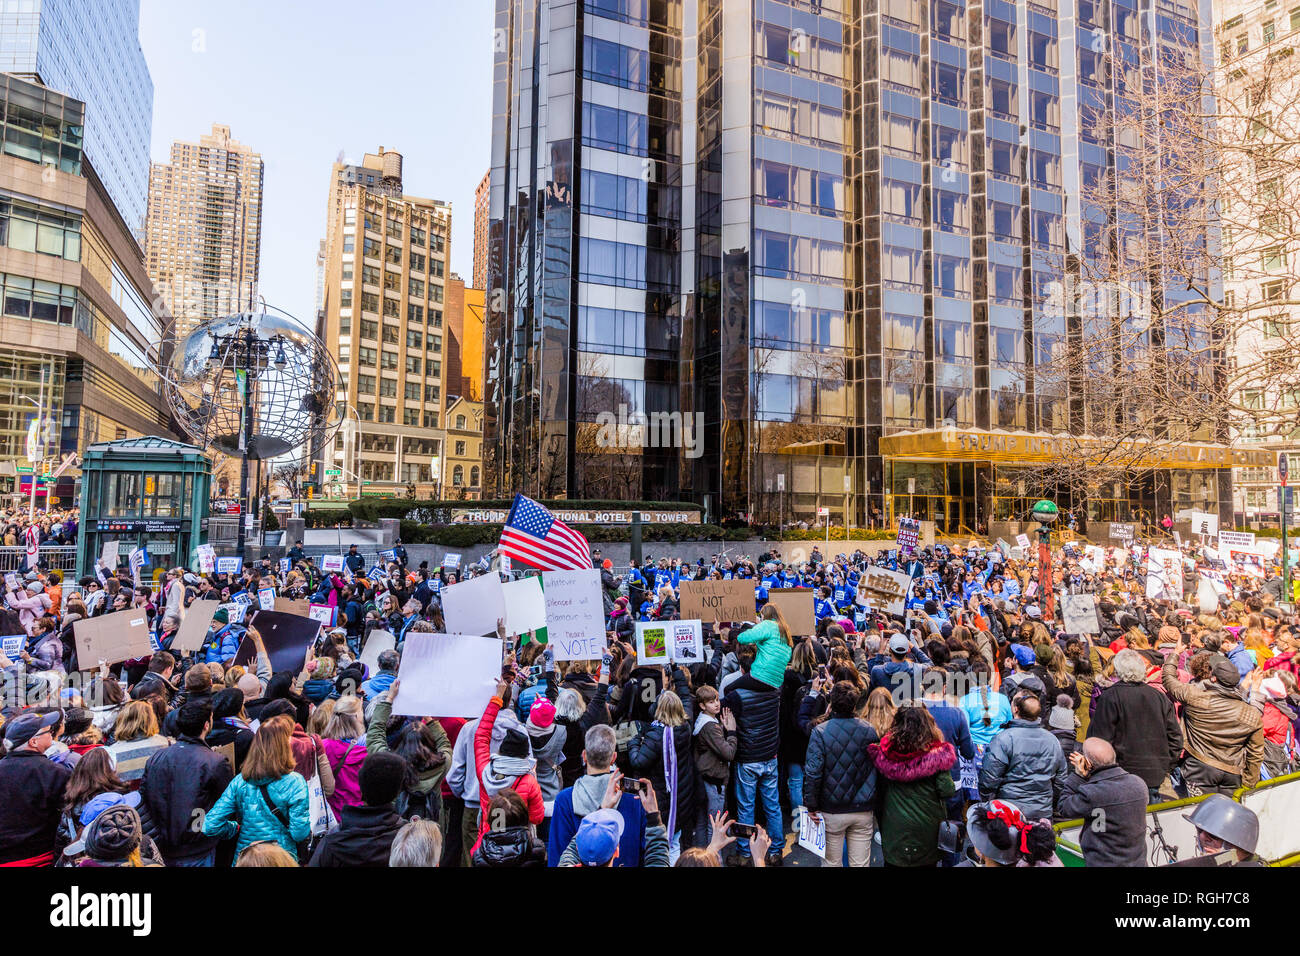 NEW YORK CITY- MARCH 24, 2018 : New yorker on a demonstration protest march for gun control in front of the Trump hotel Stock Photo